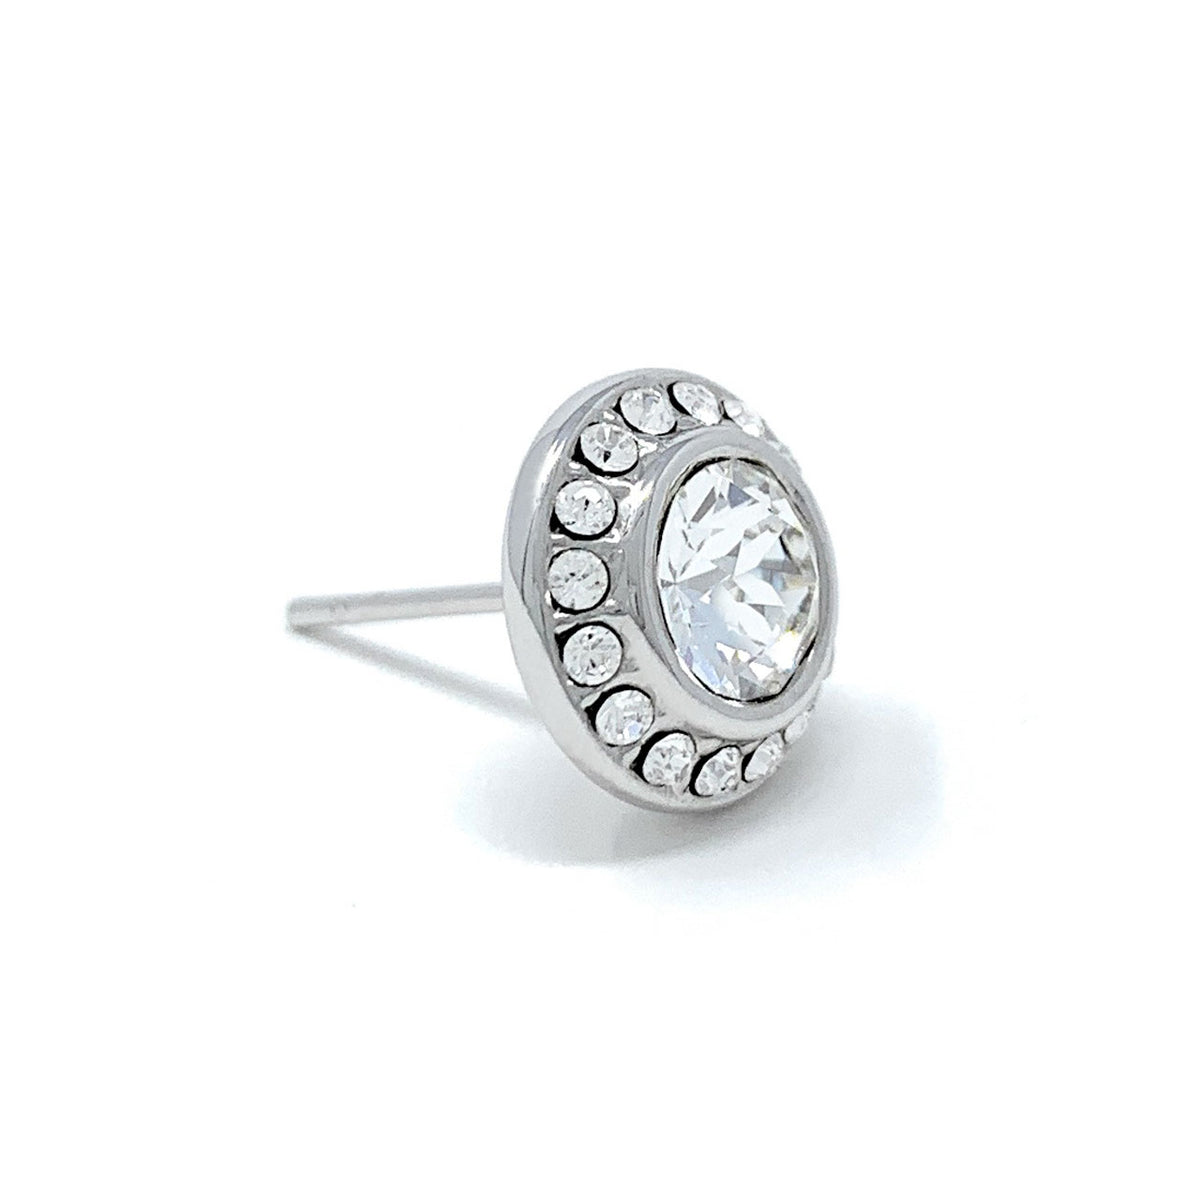 Halo Pave Stud Earrings with White Clear Round Crystals from Swarovski Silver Toned Rhodium Plated - Ed Heart